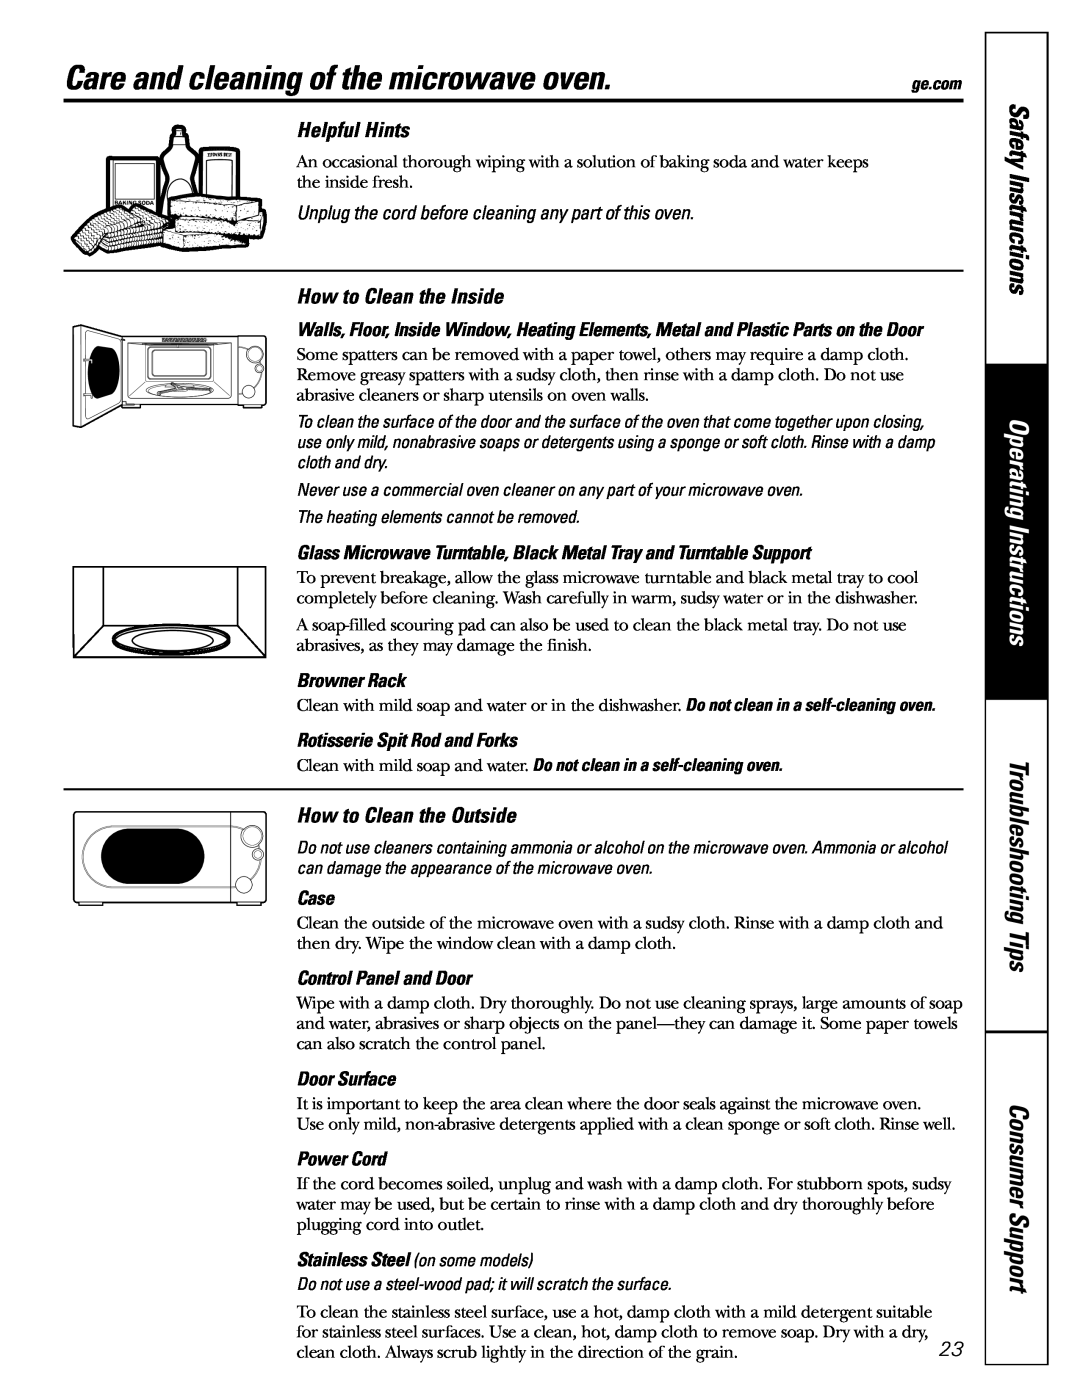 GE JES1289 Care and cleaning of the microwave oven, Safety Instructions, Operating Instructions, Browner Rack, Case 